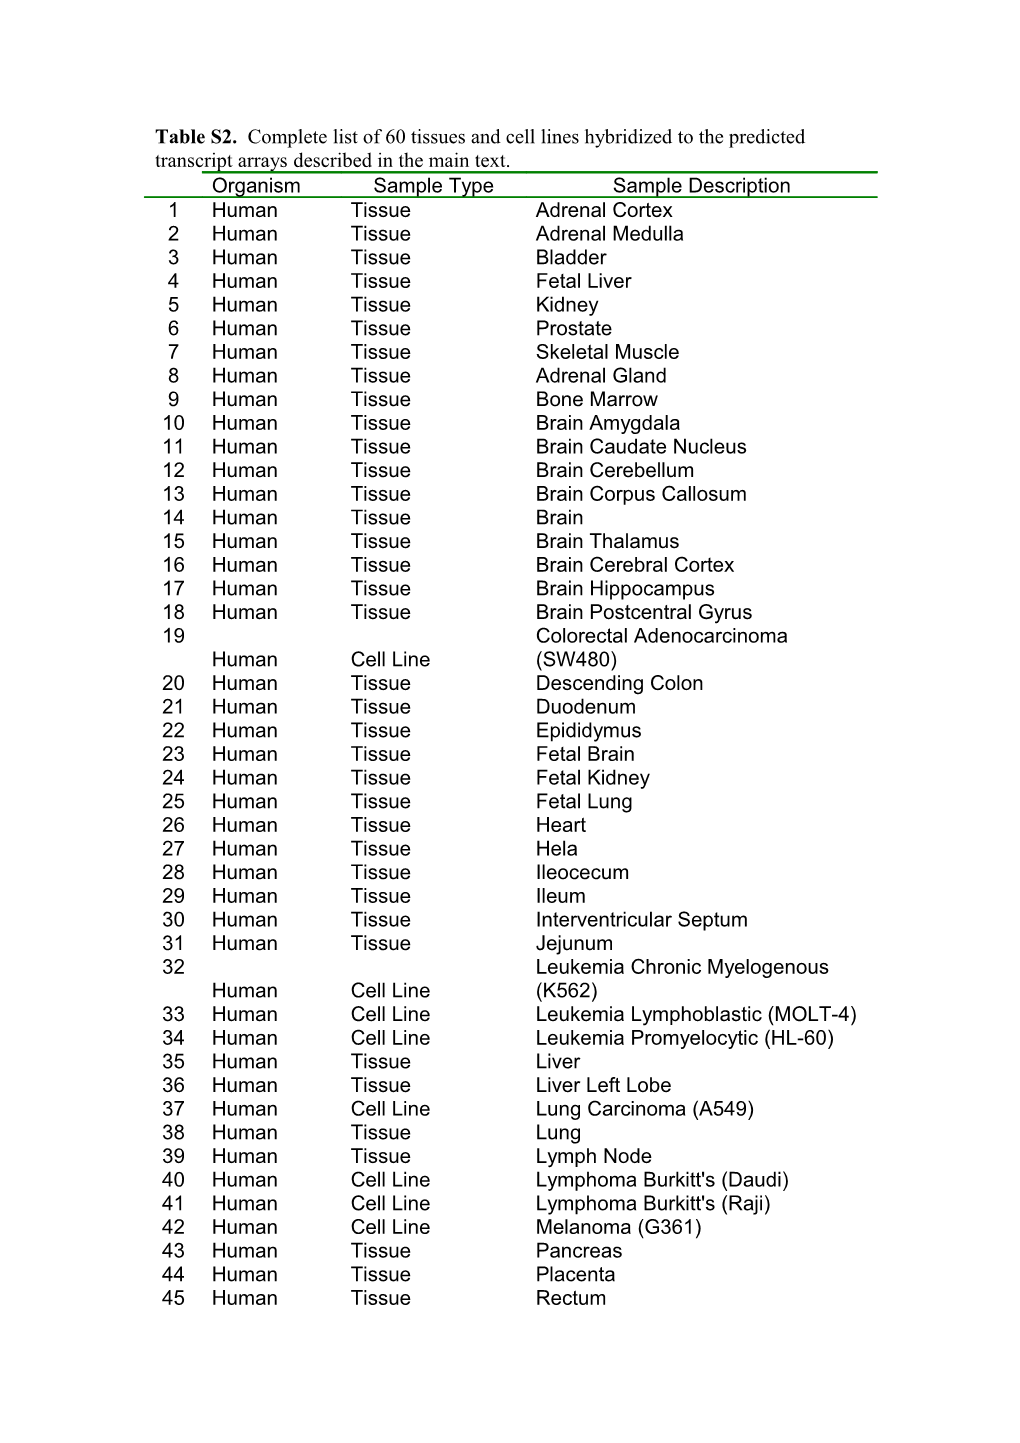 Table S2. Complete List of 60 Tissues and Cell Lines Hybridized to the Predicted Transcript